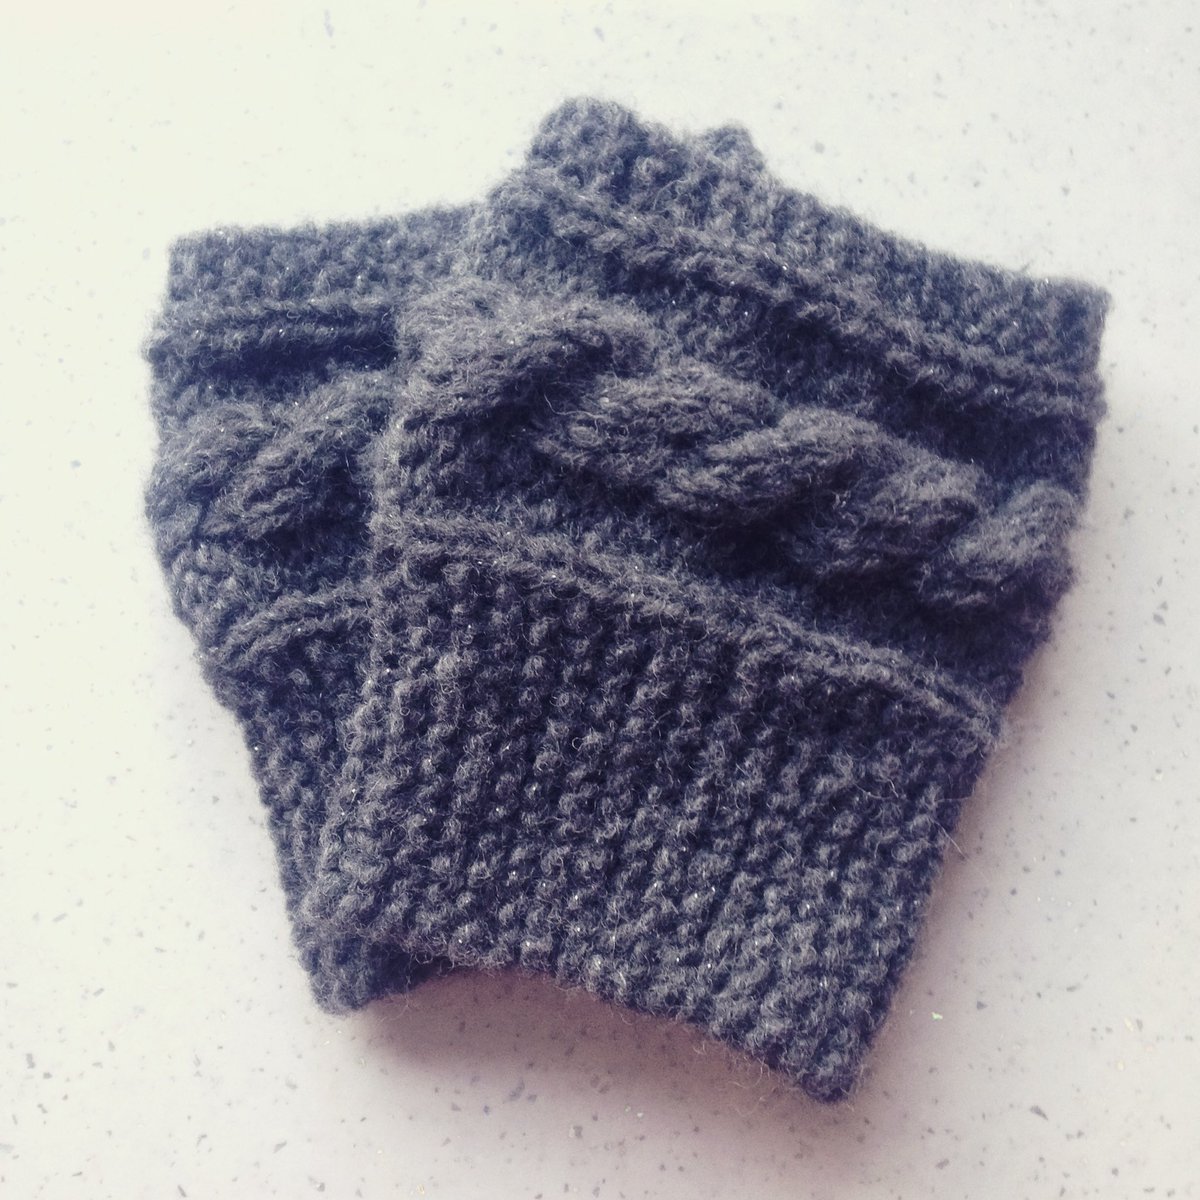 These boot cuffs hot off the needles and passed to a very happy customer today. #bootcuffs #shopsmall #woolblend #etsyseller #shopindie #craftyfeatures #etsyshop #knitted #tsparklyyarn #sparkly #handmade #personalizedgifts #happycustomer #busyday #hmuk #etsymk #rtmebb